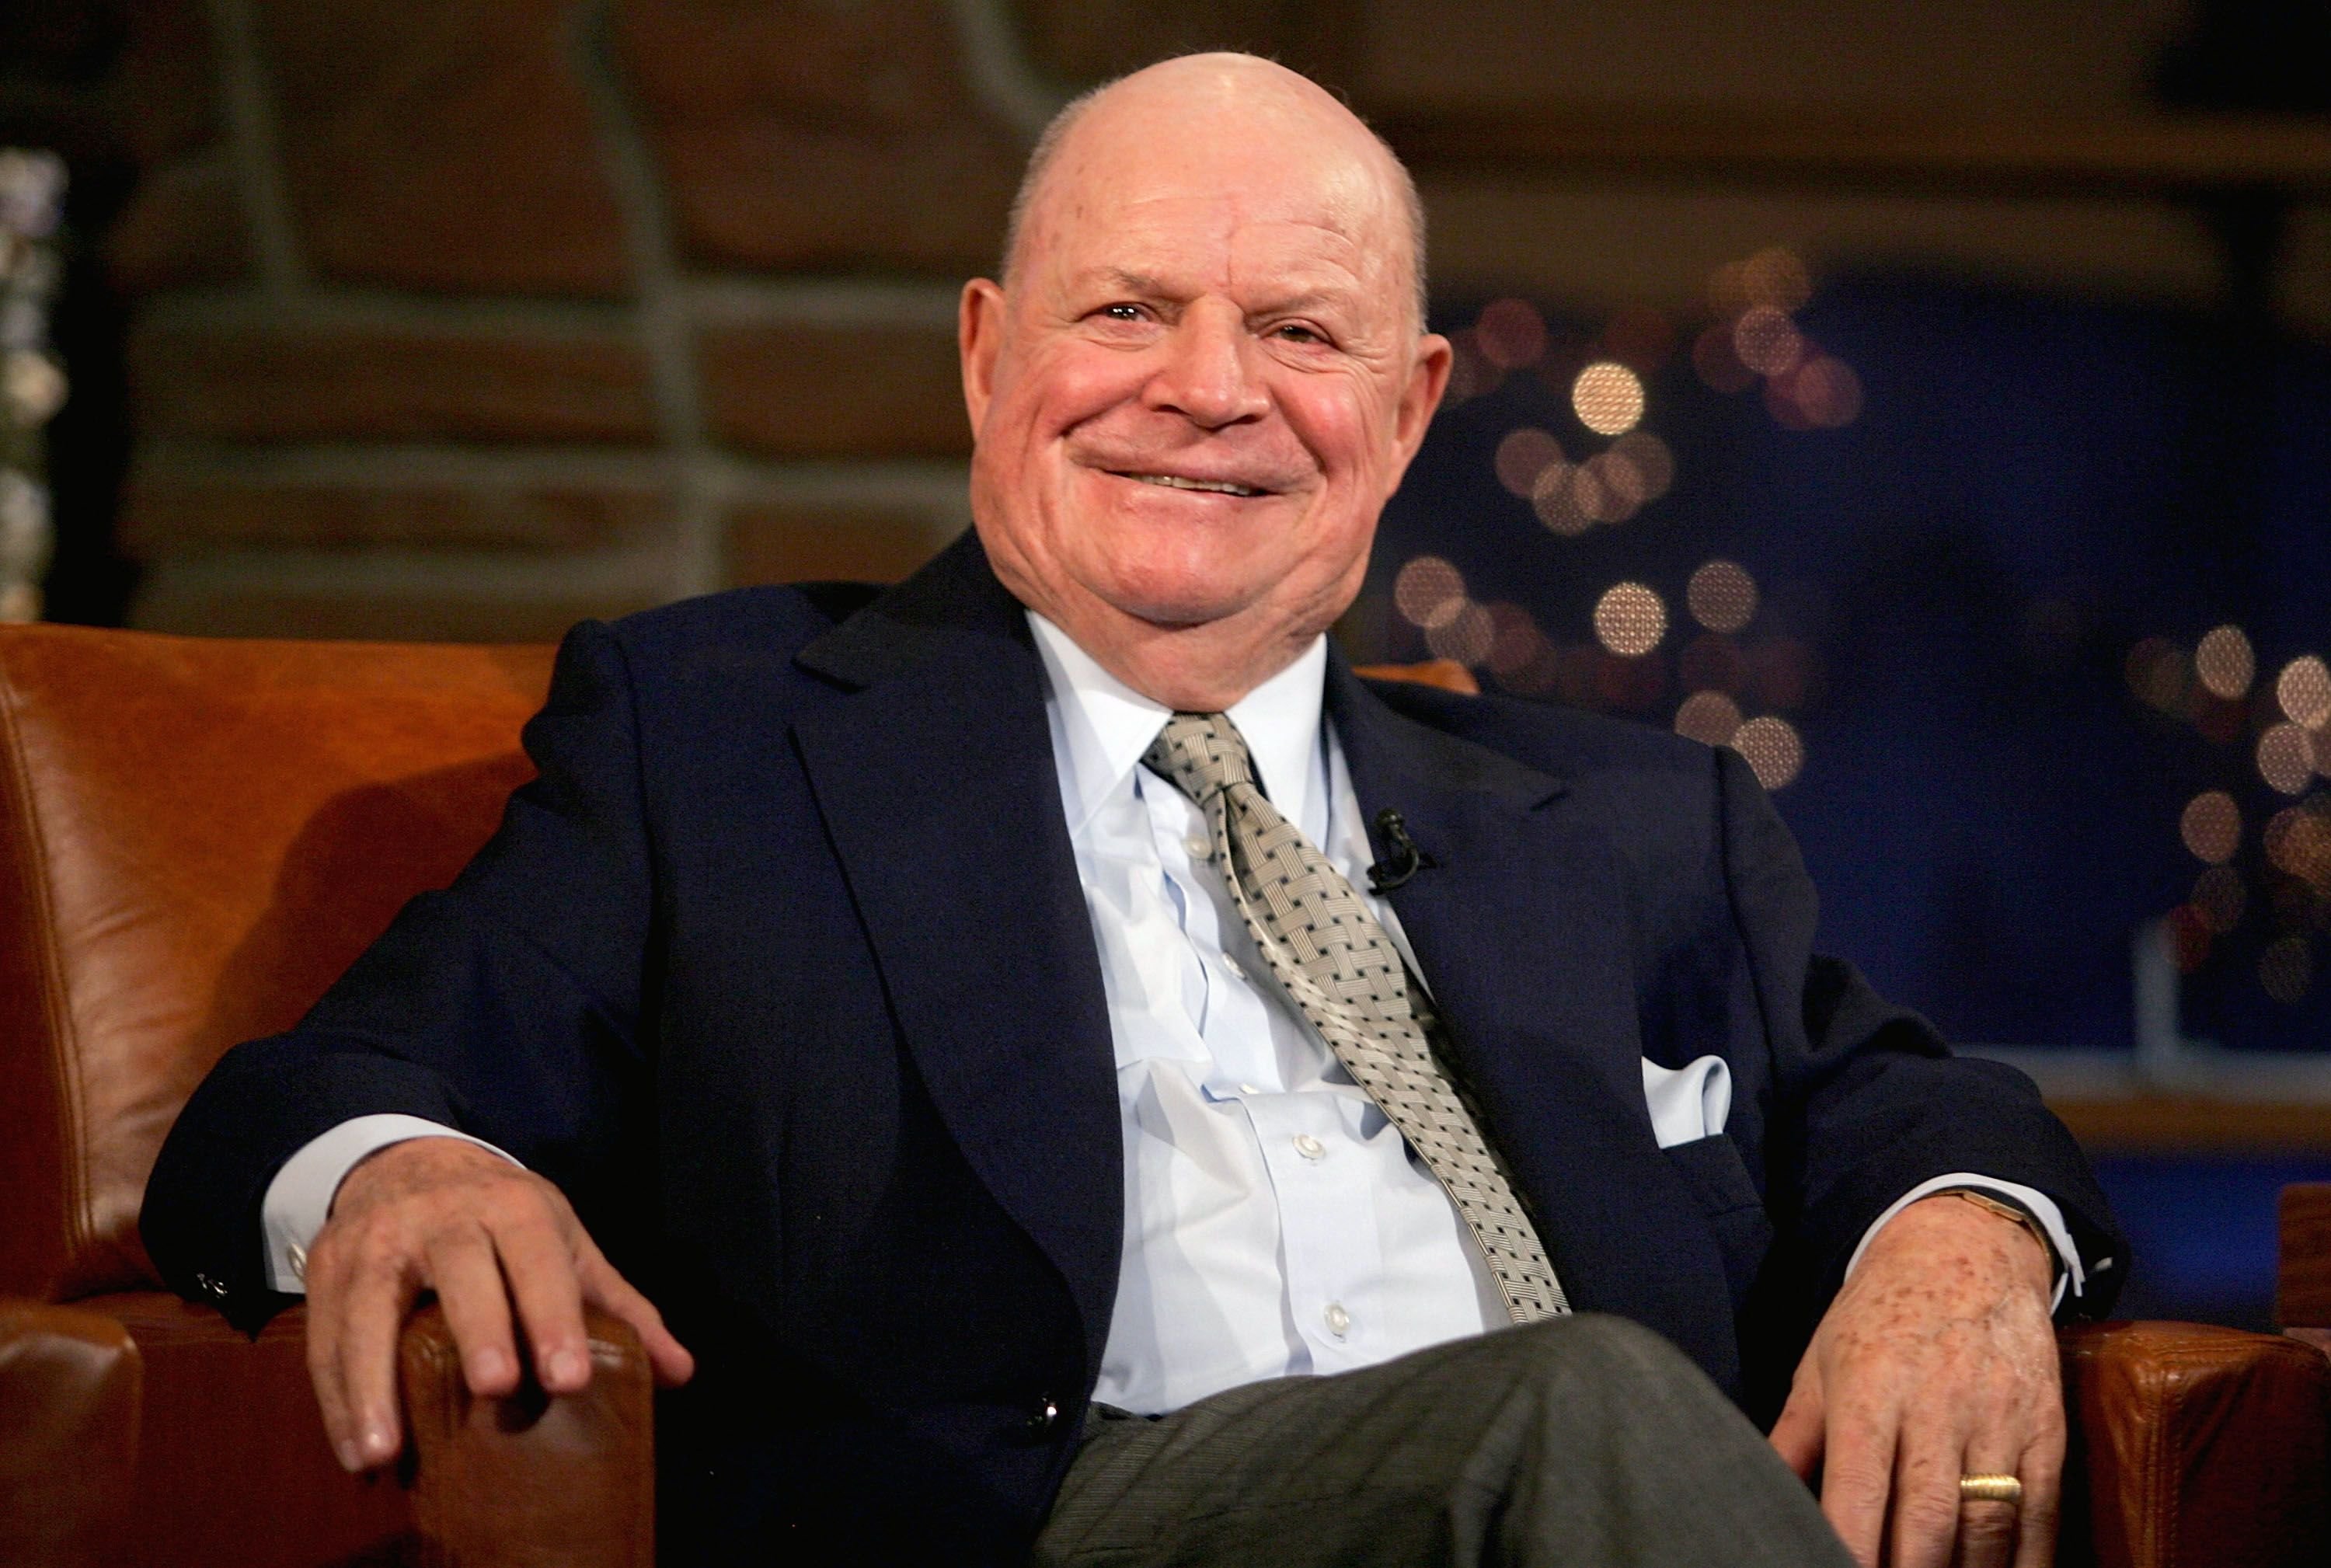 Don Rickles on the "Late Late Show" on March 1, 2005 in L.A. | Photo: Getty Images